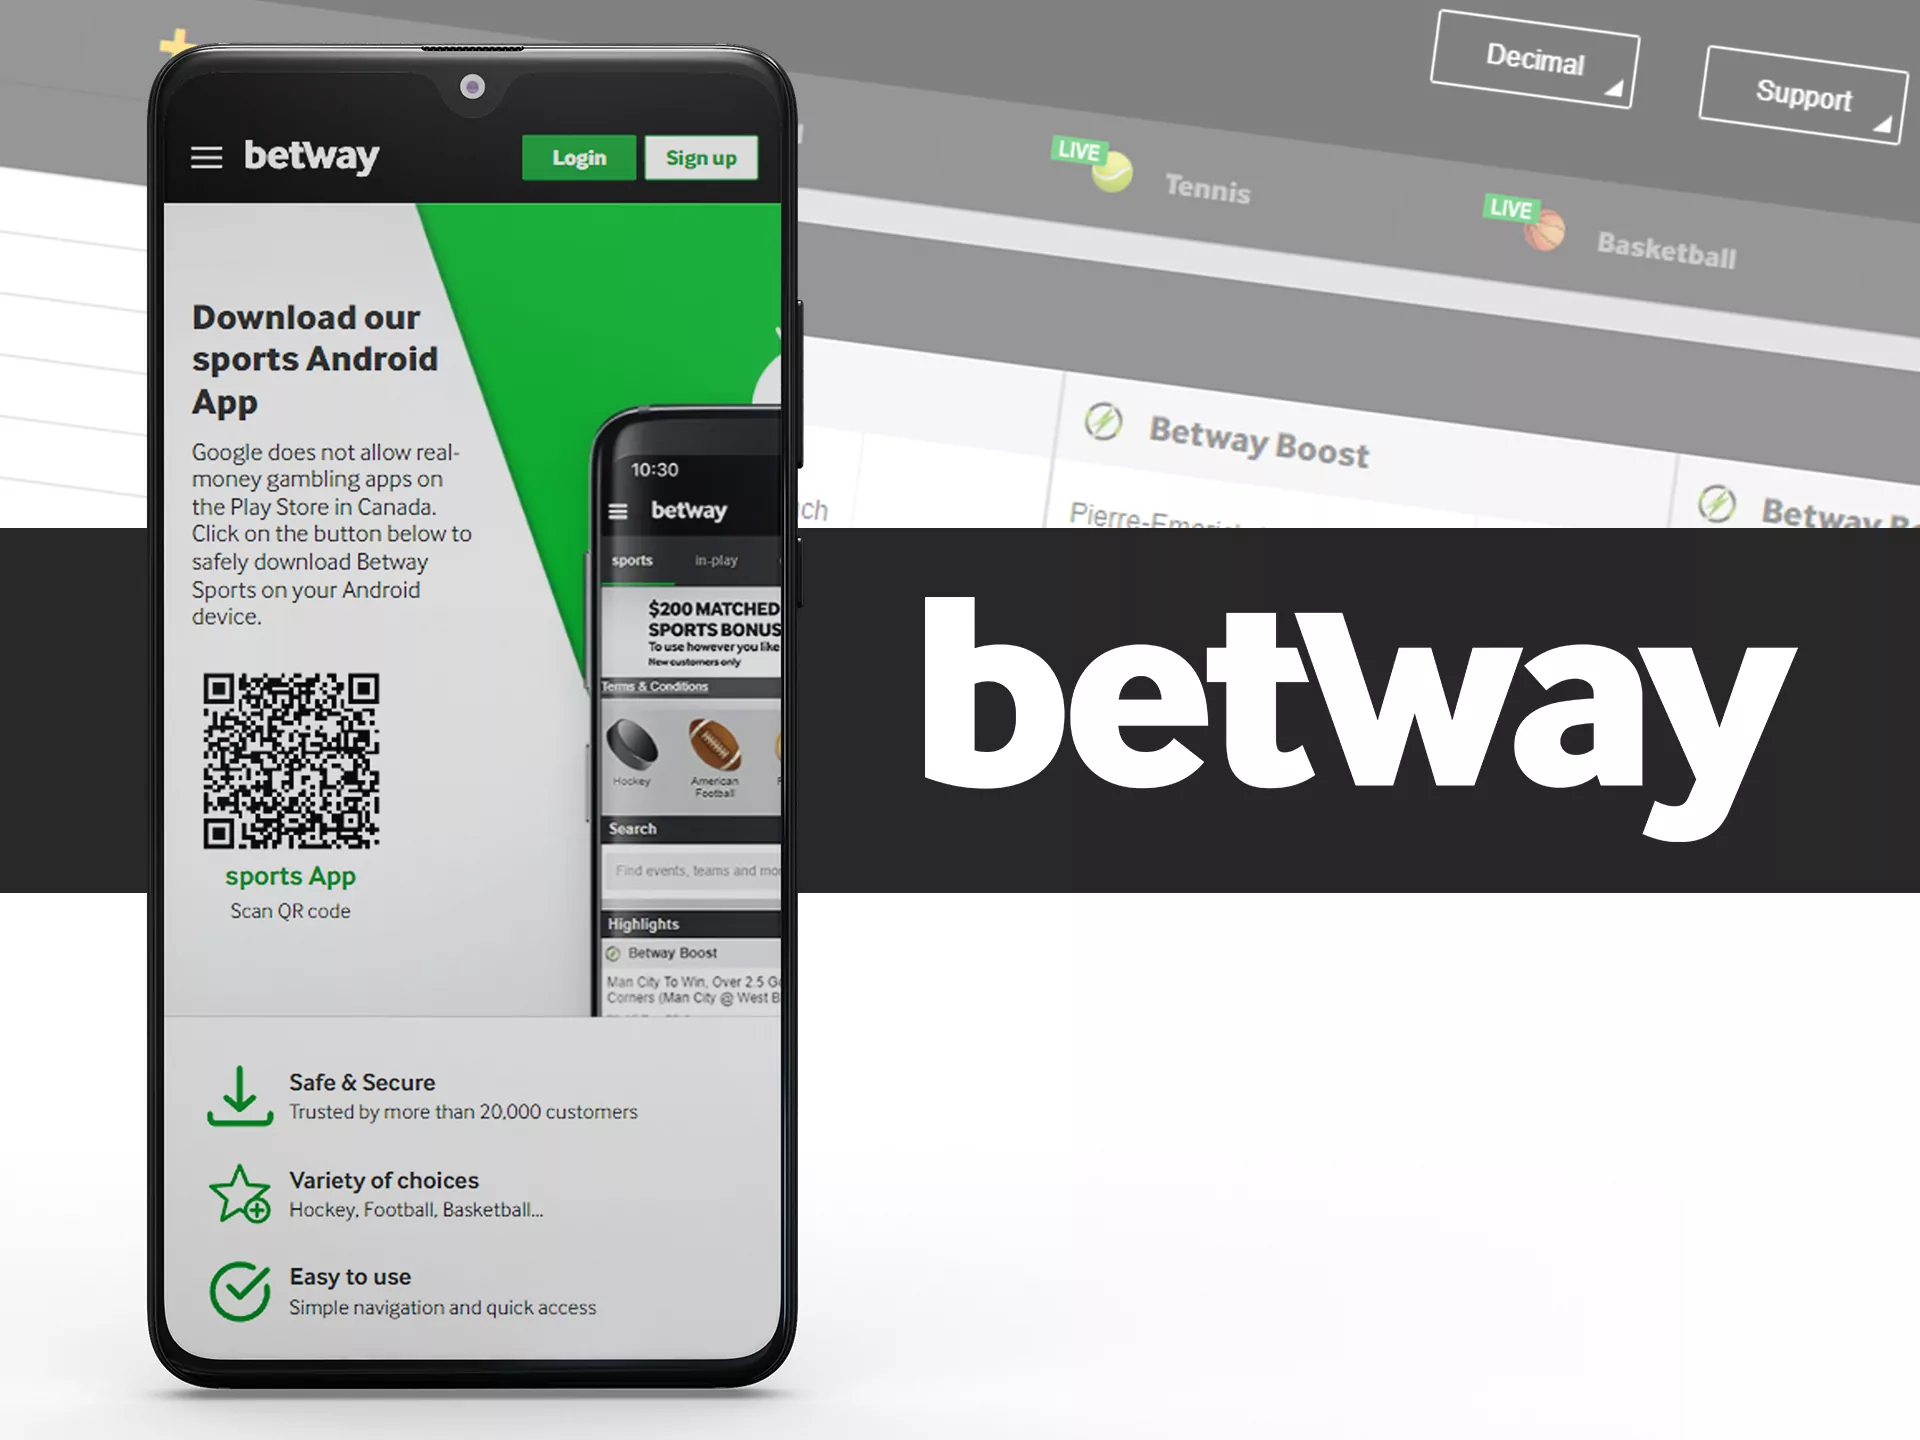 Download Betway apk for android from official website.